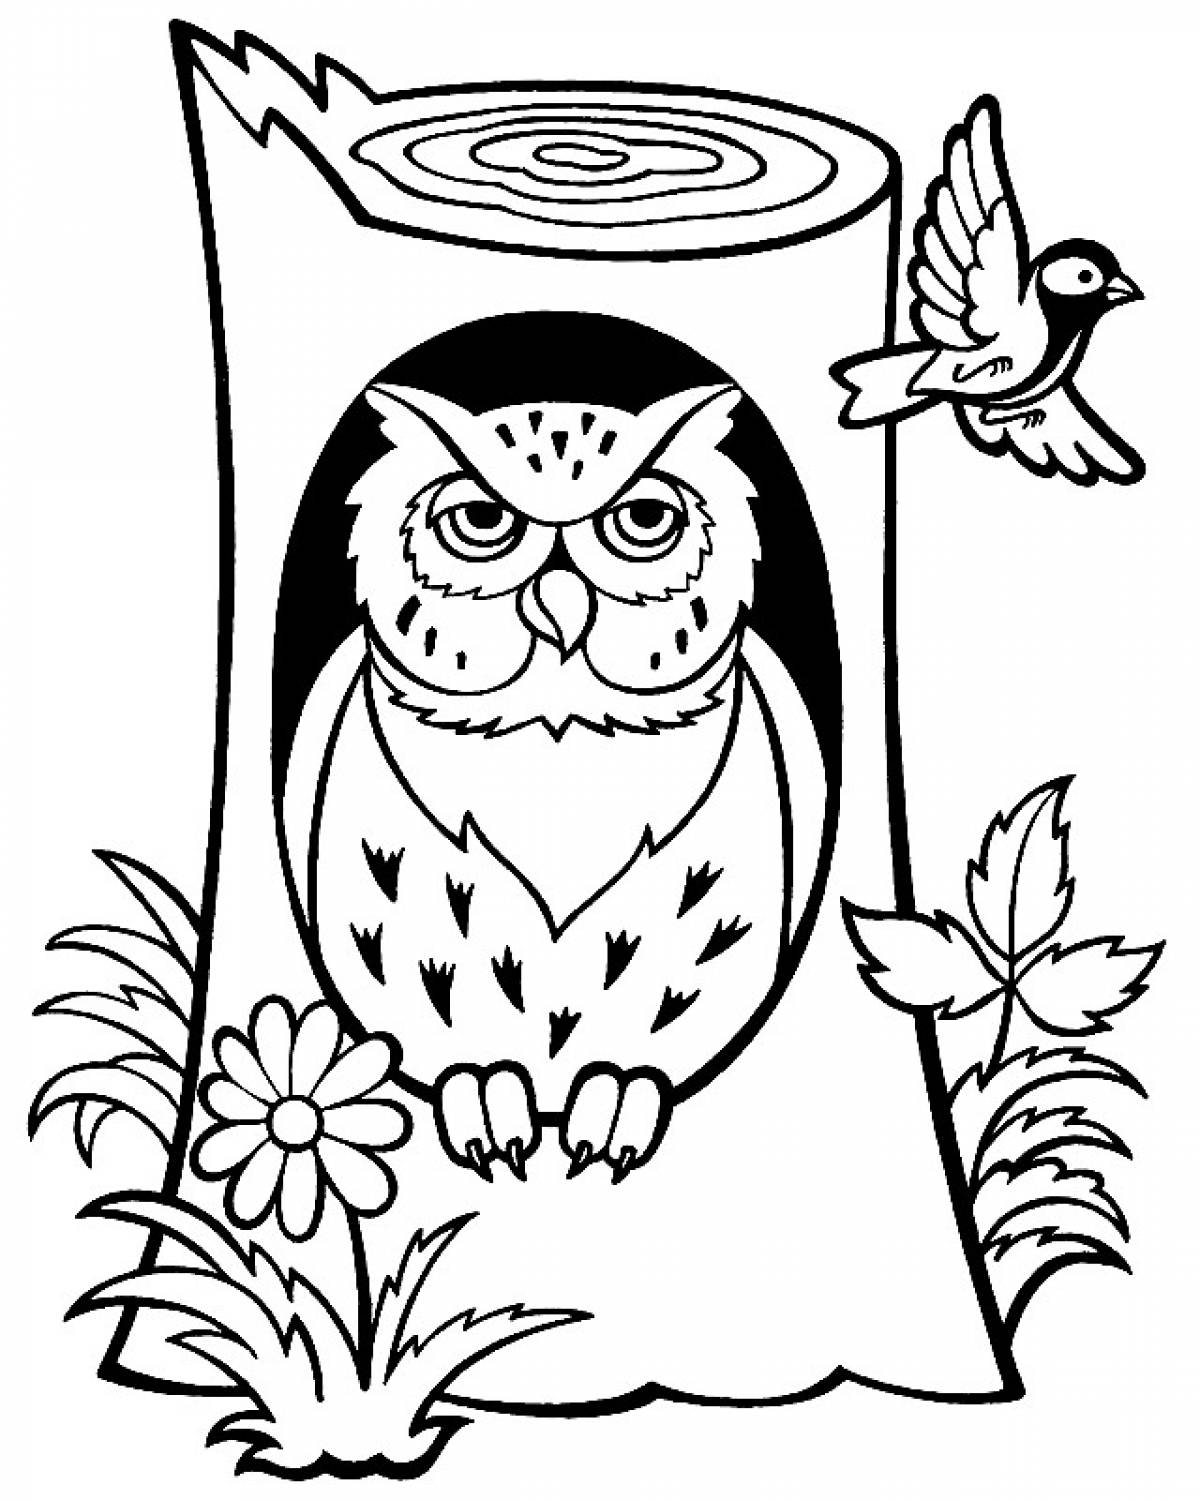 Owl in the hollow